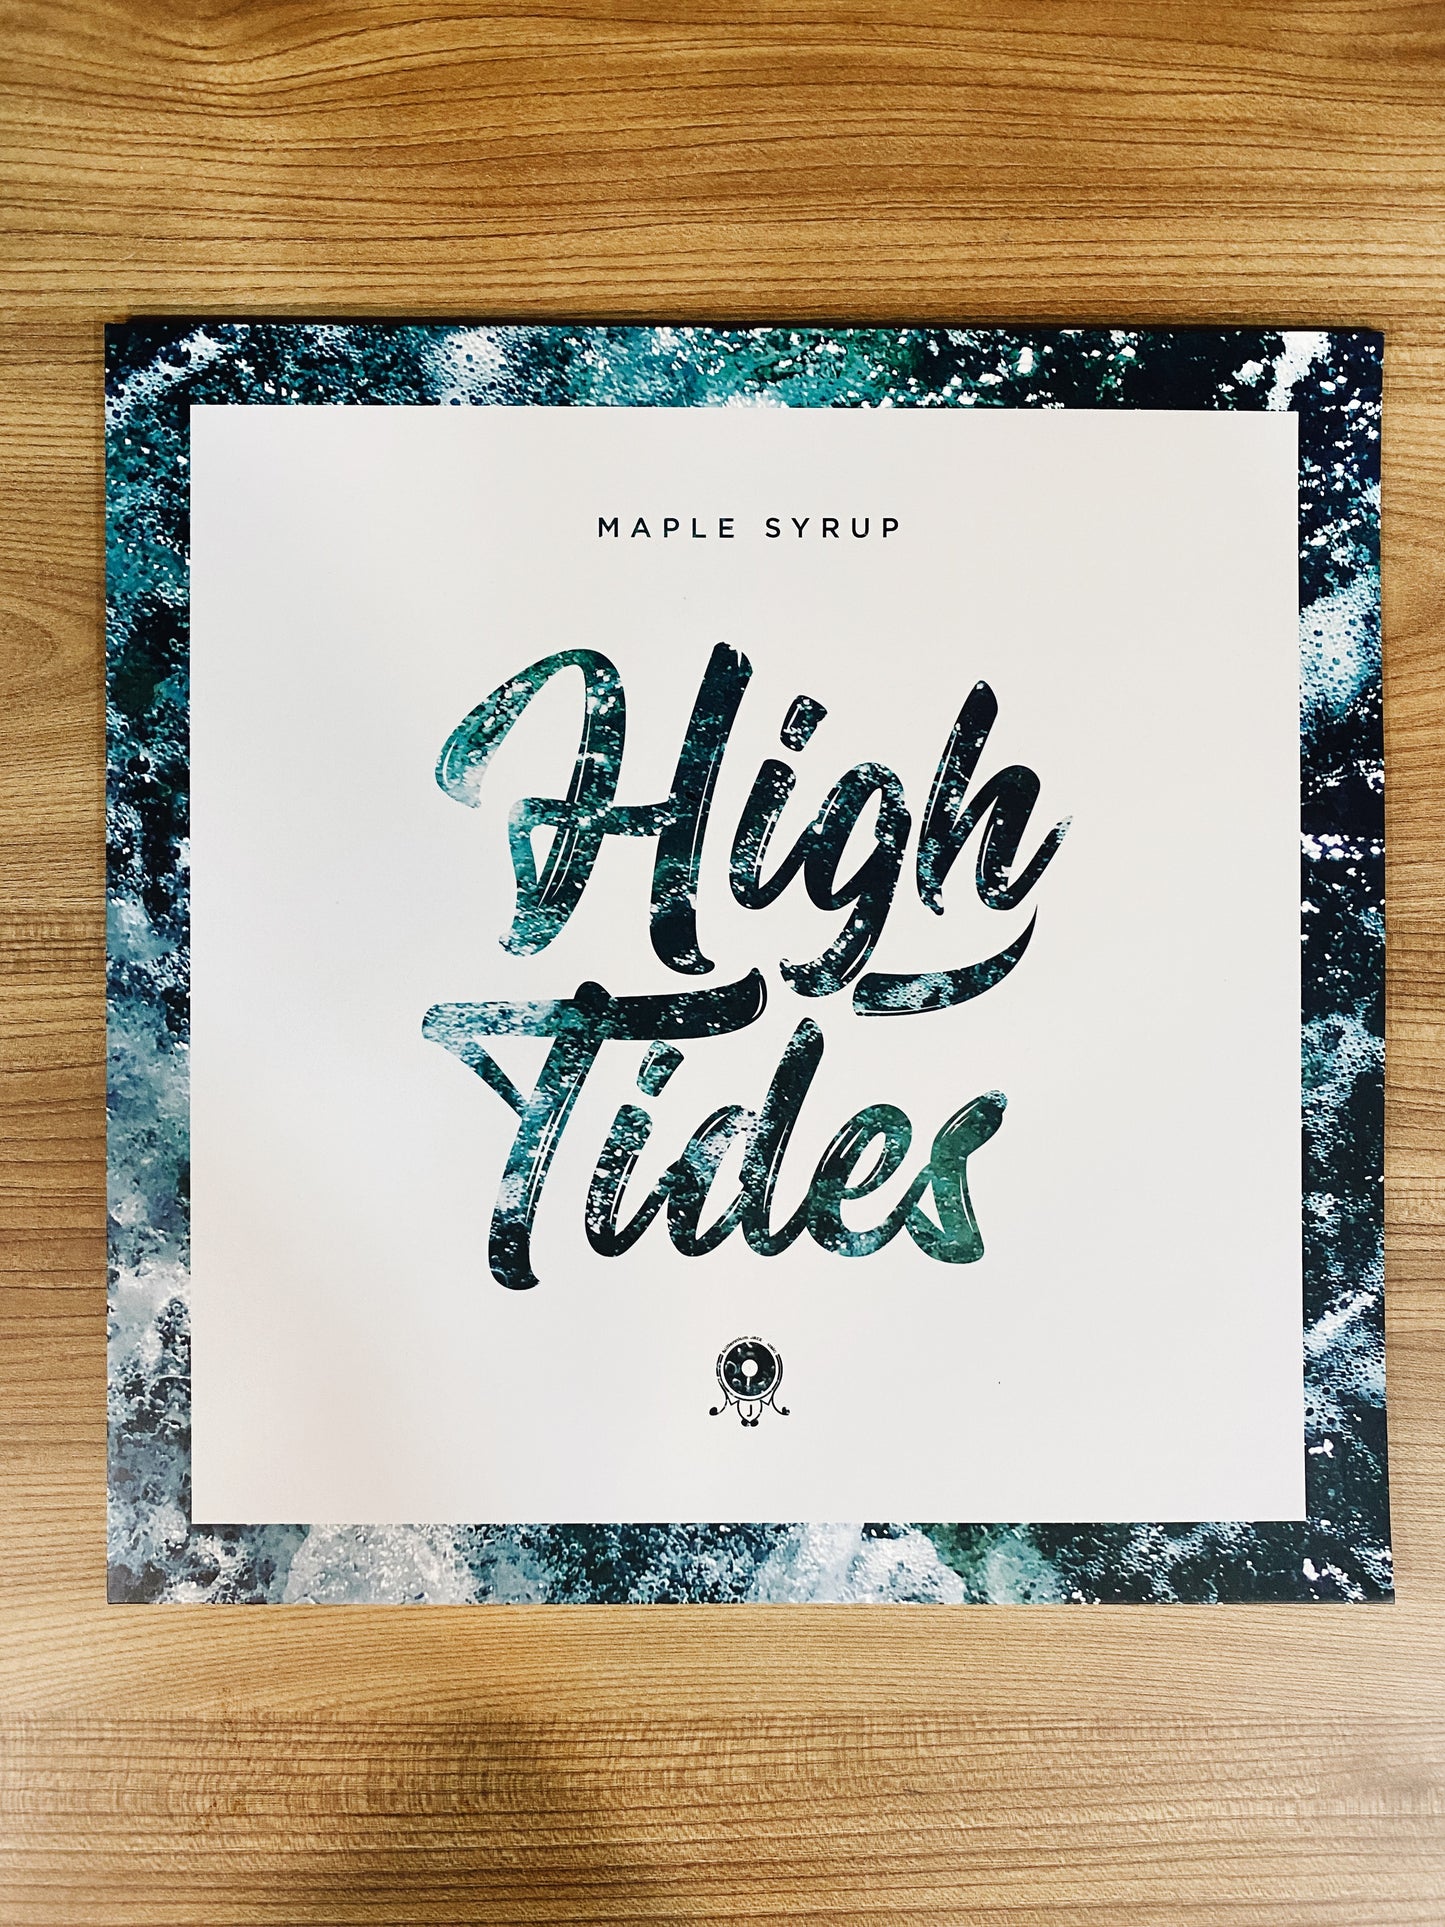 Maple Syrup – High Tides